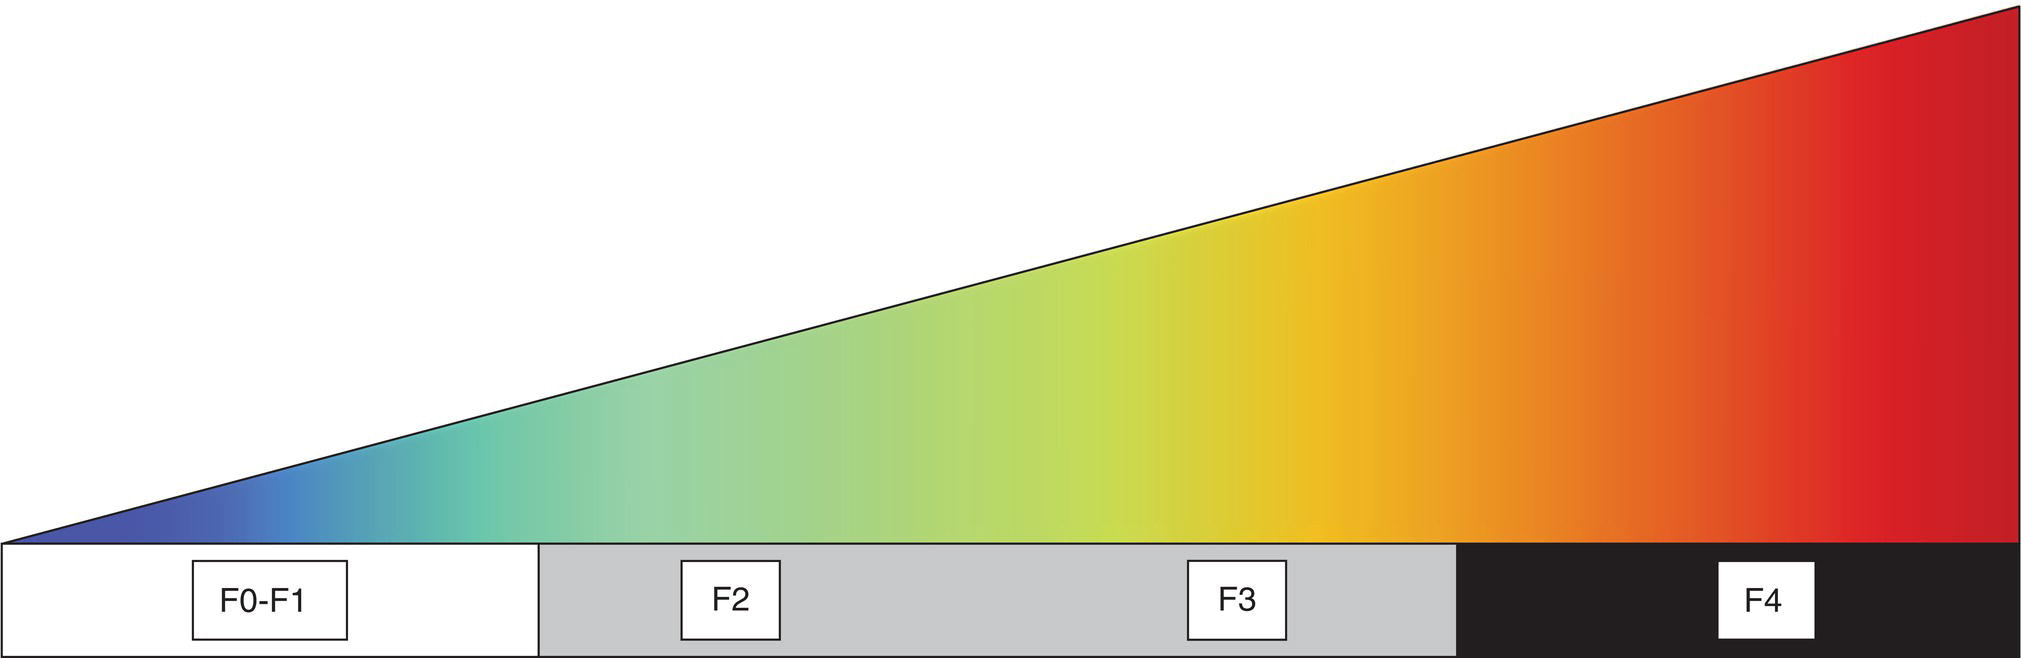 An elastography scale with four stages labeled as follows. 1. F 0 to F 1. 2. F 2. 3. F 3. 4. F 4. The grey zone indicates lower diagnostic accuracy.